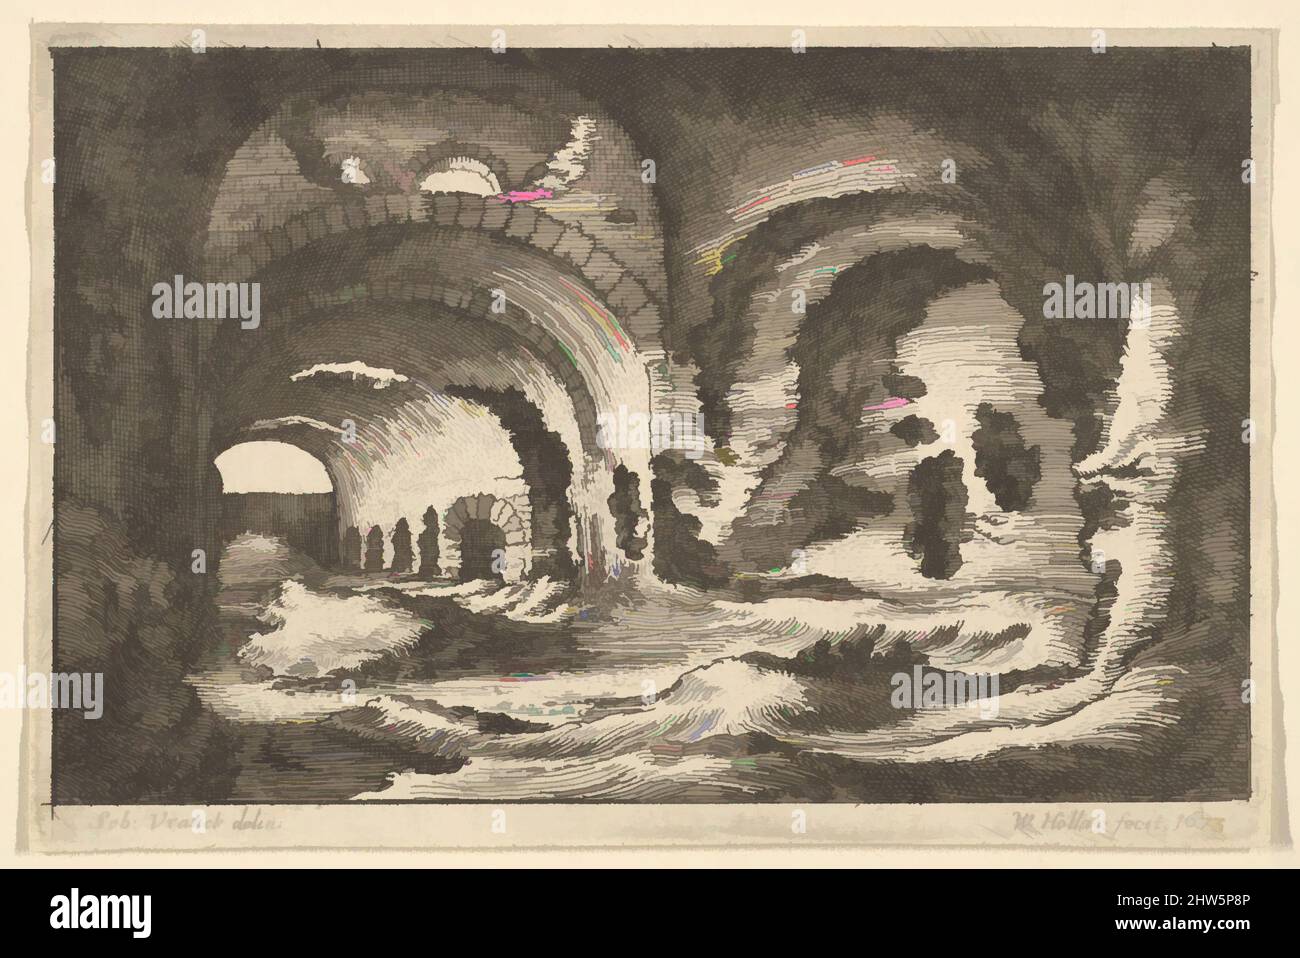 Art inspired by Roman remains at Tivoli, 1673, Etching; first state of three, Sheet: 2 3/4 × 4 3/16 in. (7 × 10.7 cm), Prints, After Sebastiaen Vrancx (Netherlandish, Antwerp 1573–1647 Antwerp), Interior of ruined Roman galleries at Tivoli, ending in fence on at far left; after, Classic works modernized by Artotop with a splash of modernity. Shapes, color and value, eye-catching visual impact on art. Emotions through freedom of artworks in a contemporary way. A timeless message pursuing a wildly creative new direction. Artists turning to the digital medium and creating the Artotop NFT Stock Photo